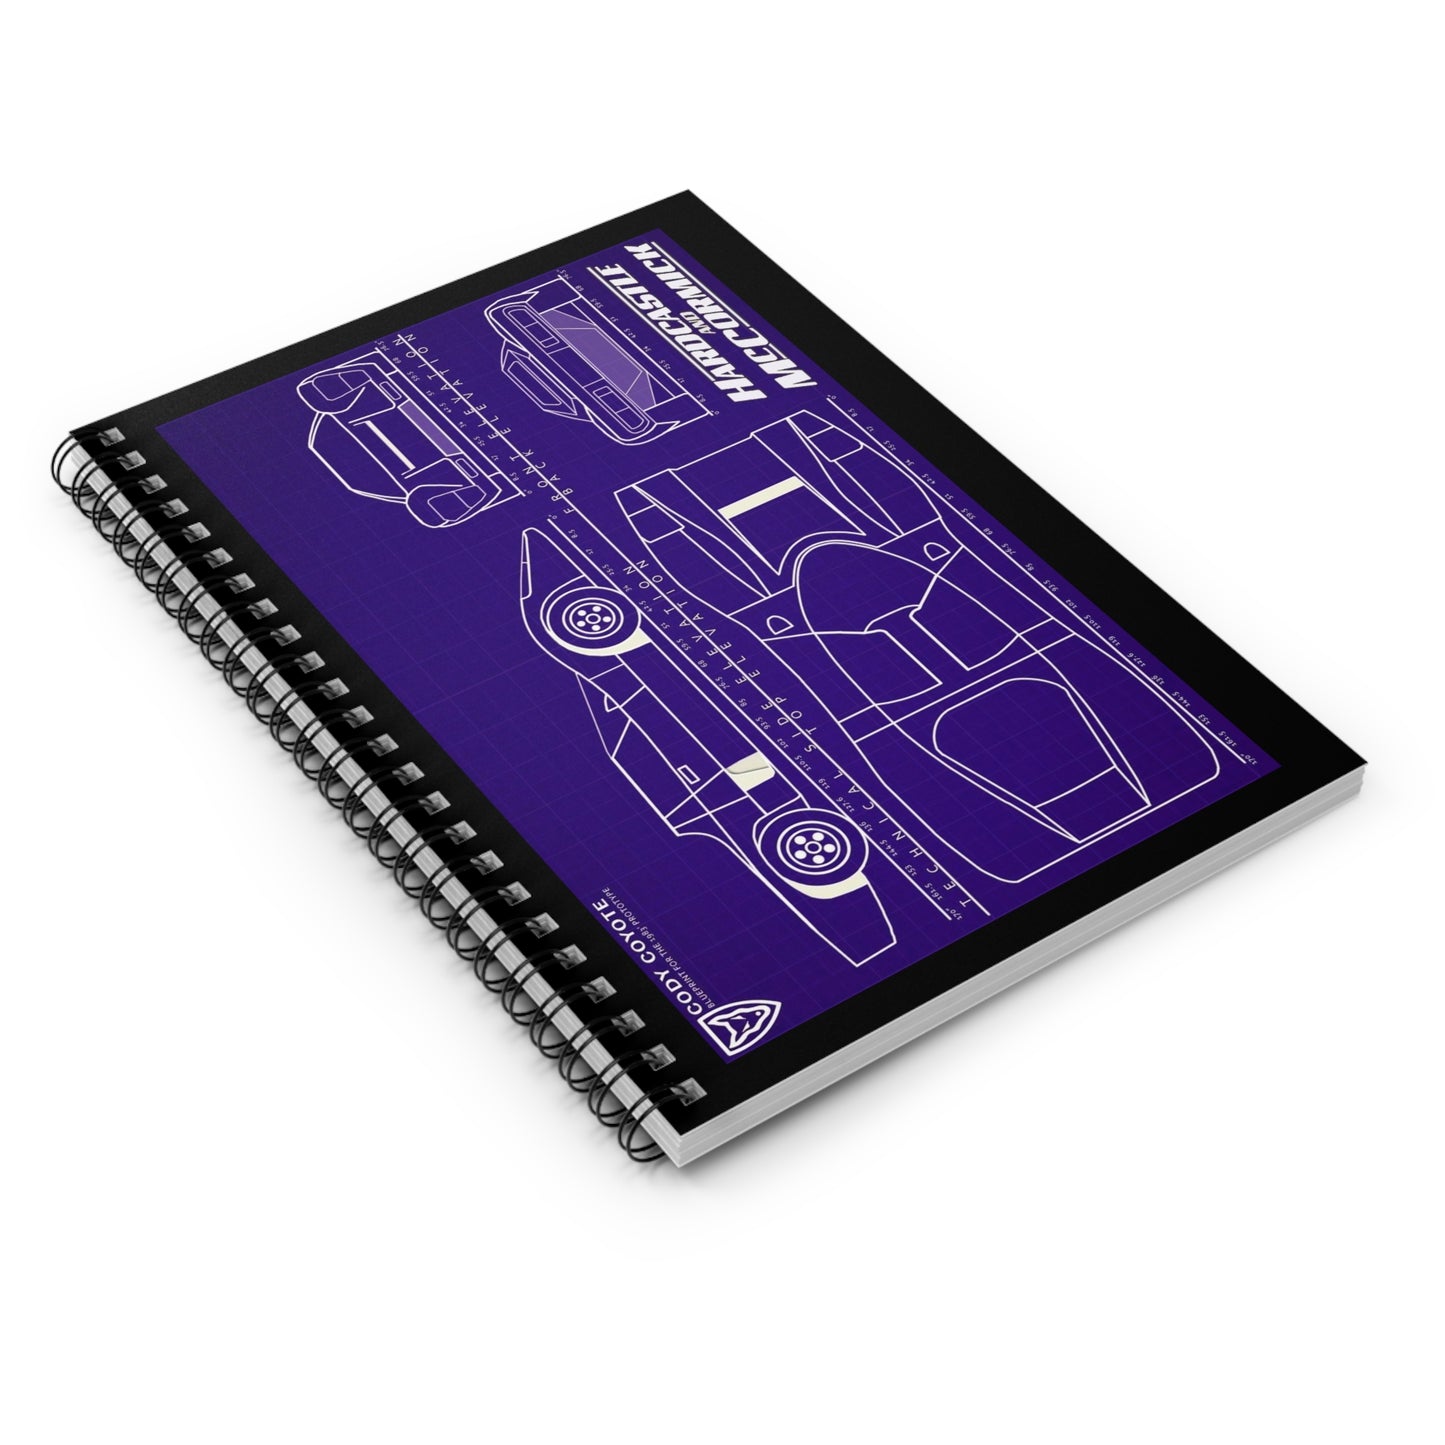 Coyote X Blue Print Spiral Notebook - Ruled Line